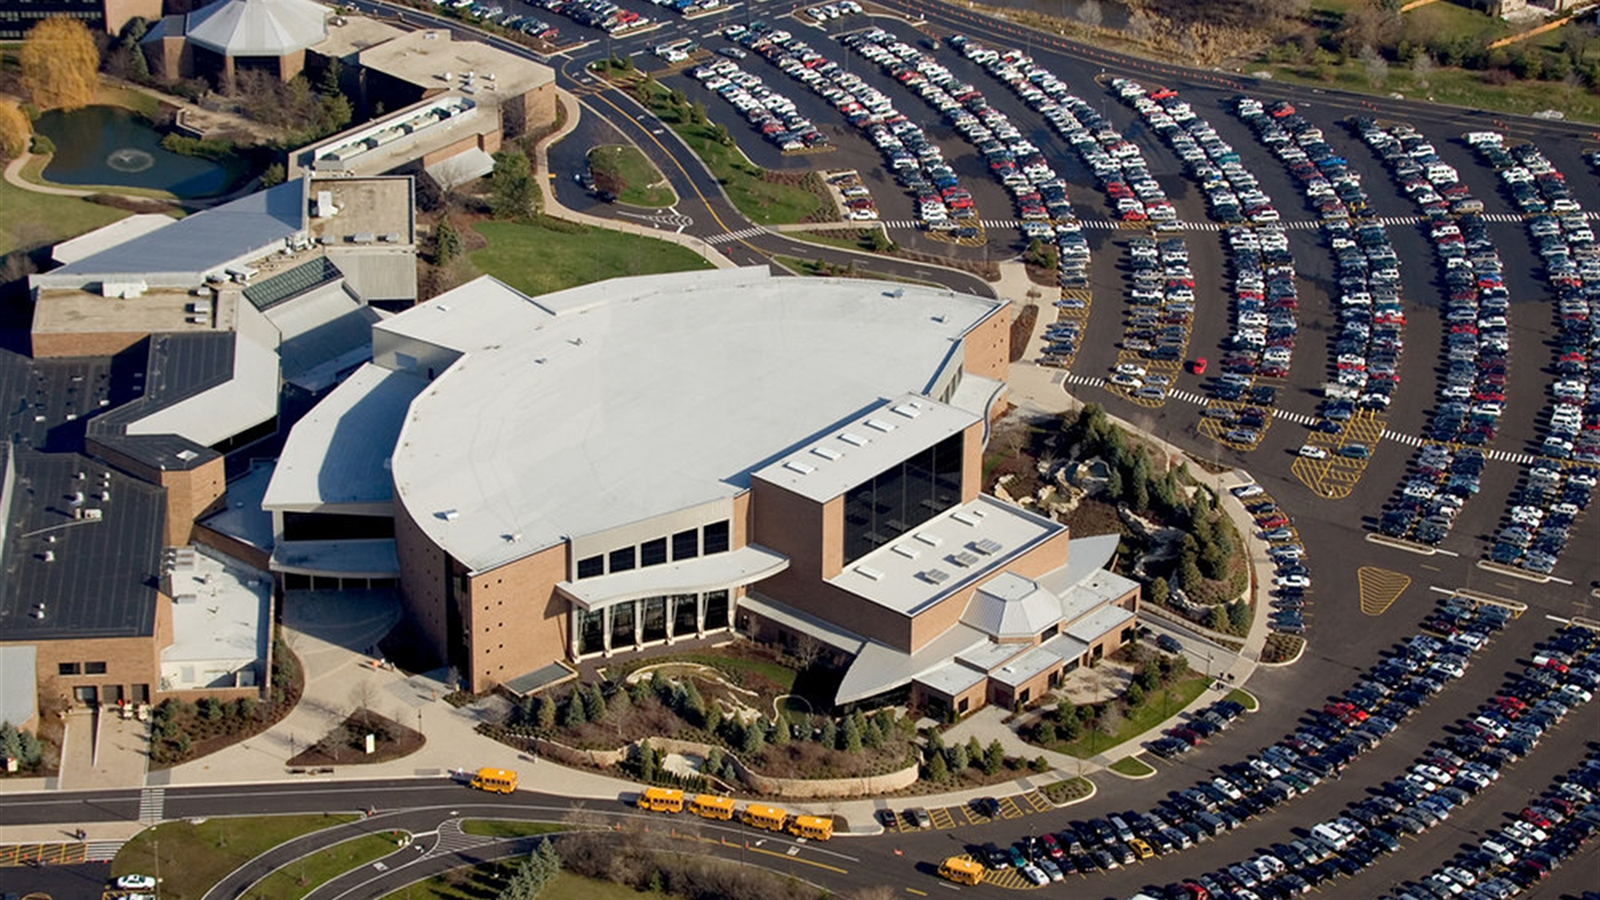 The main campus of Willow Creek Community Church in South Barrington, Illinois. Photo courtesy of Willow Creek Community Church